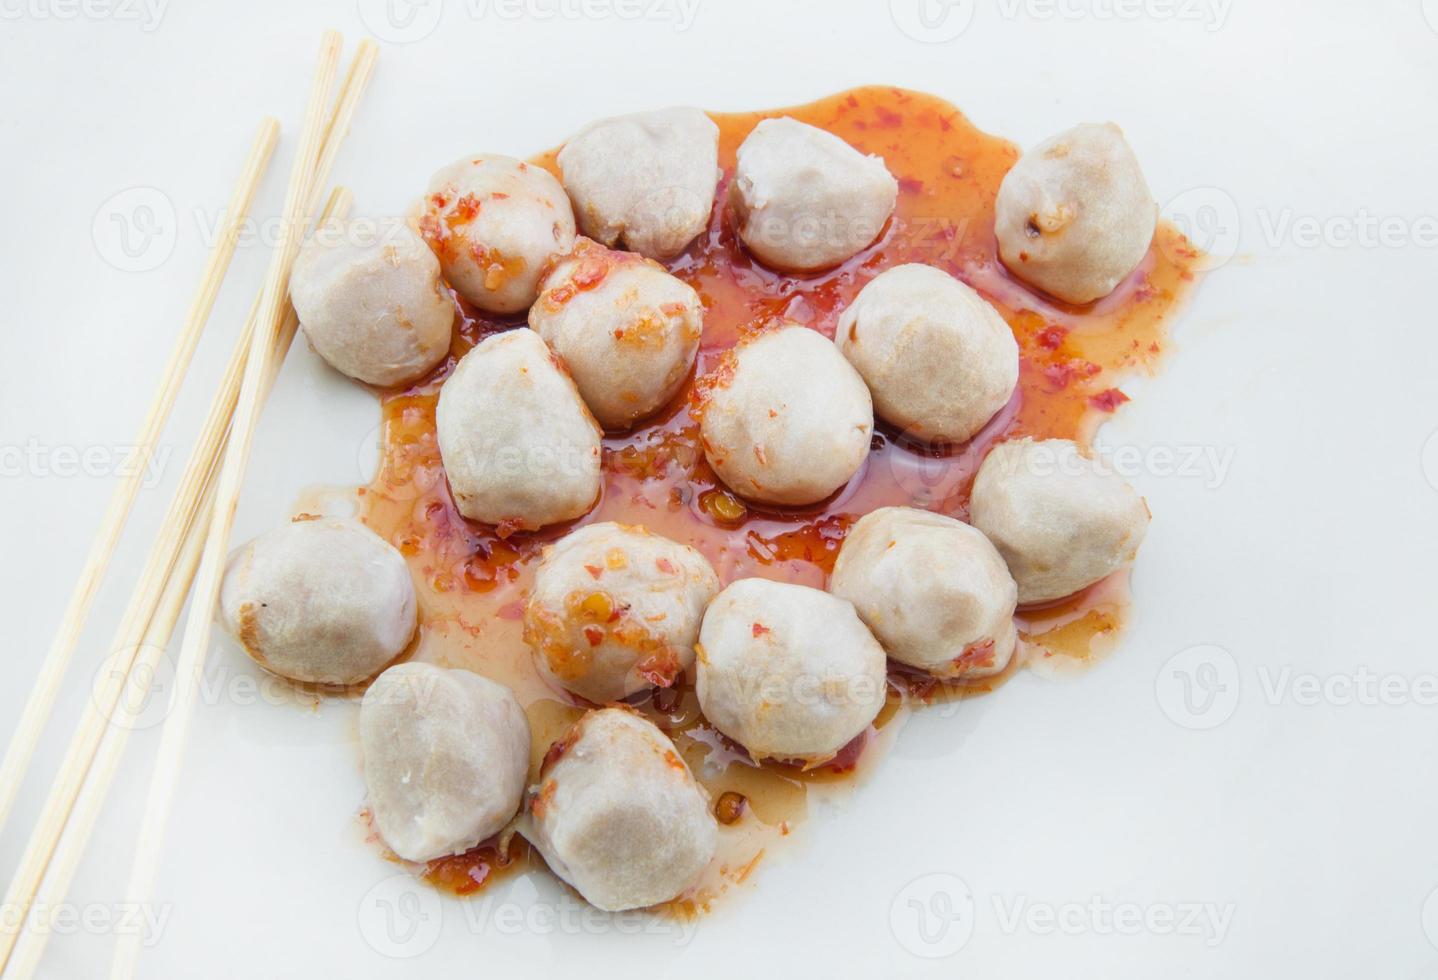 grilled meat ball on white background photo